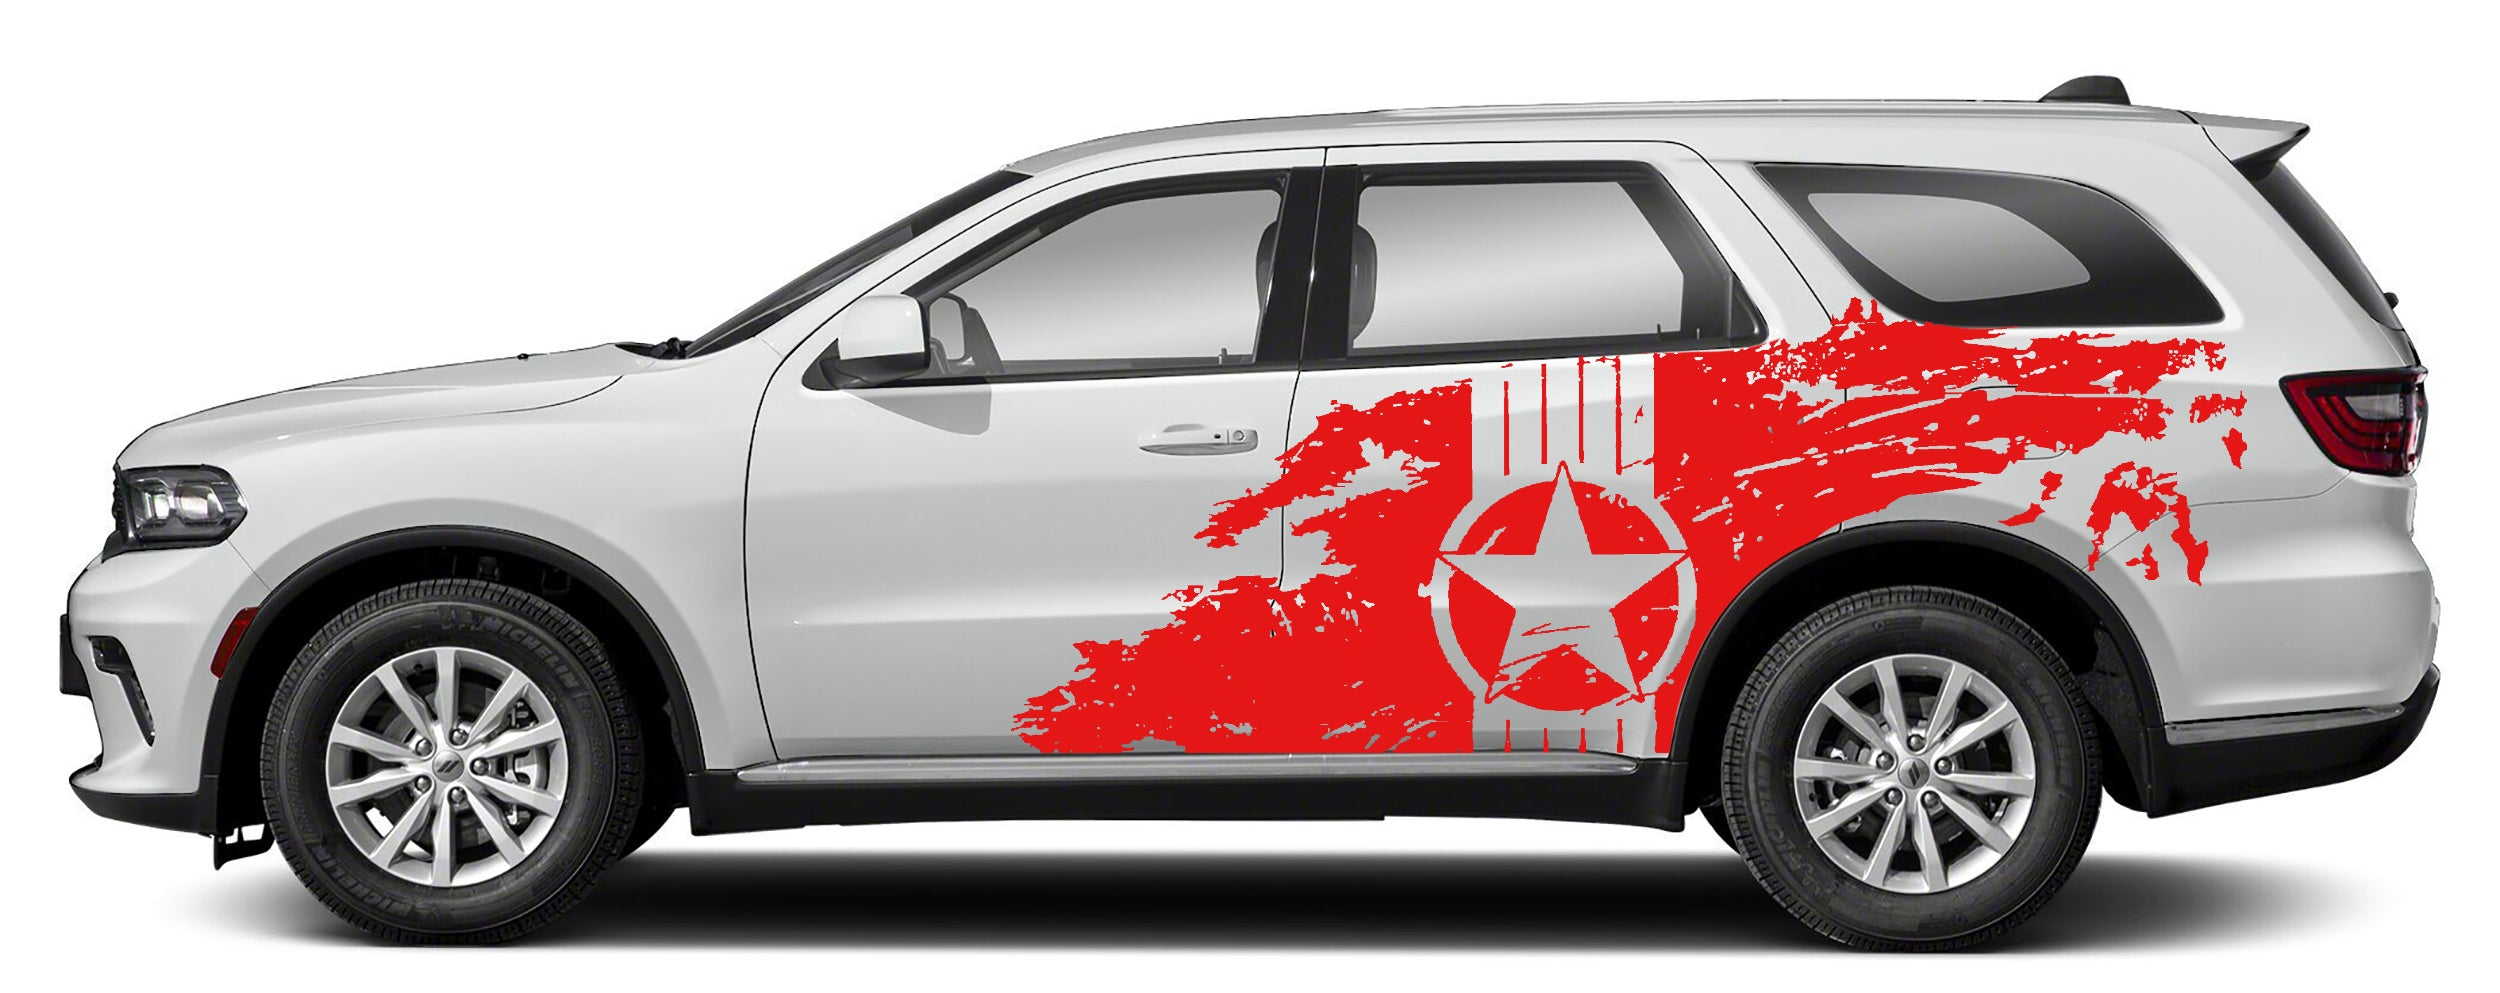 military star splash side graphics for dodge durango 2021 to 2024 models red